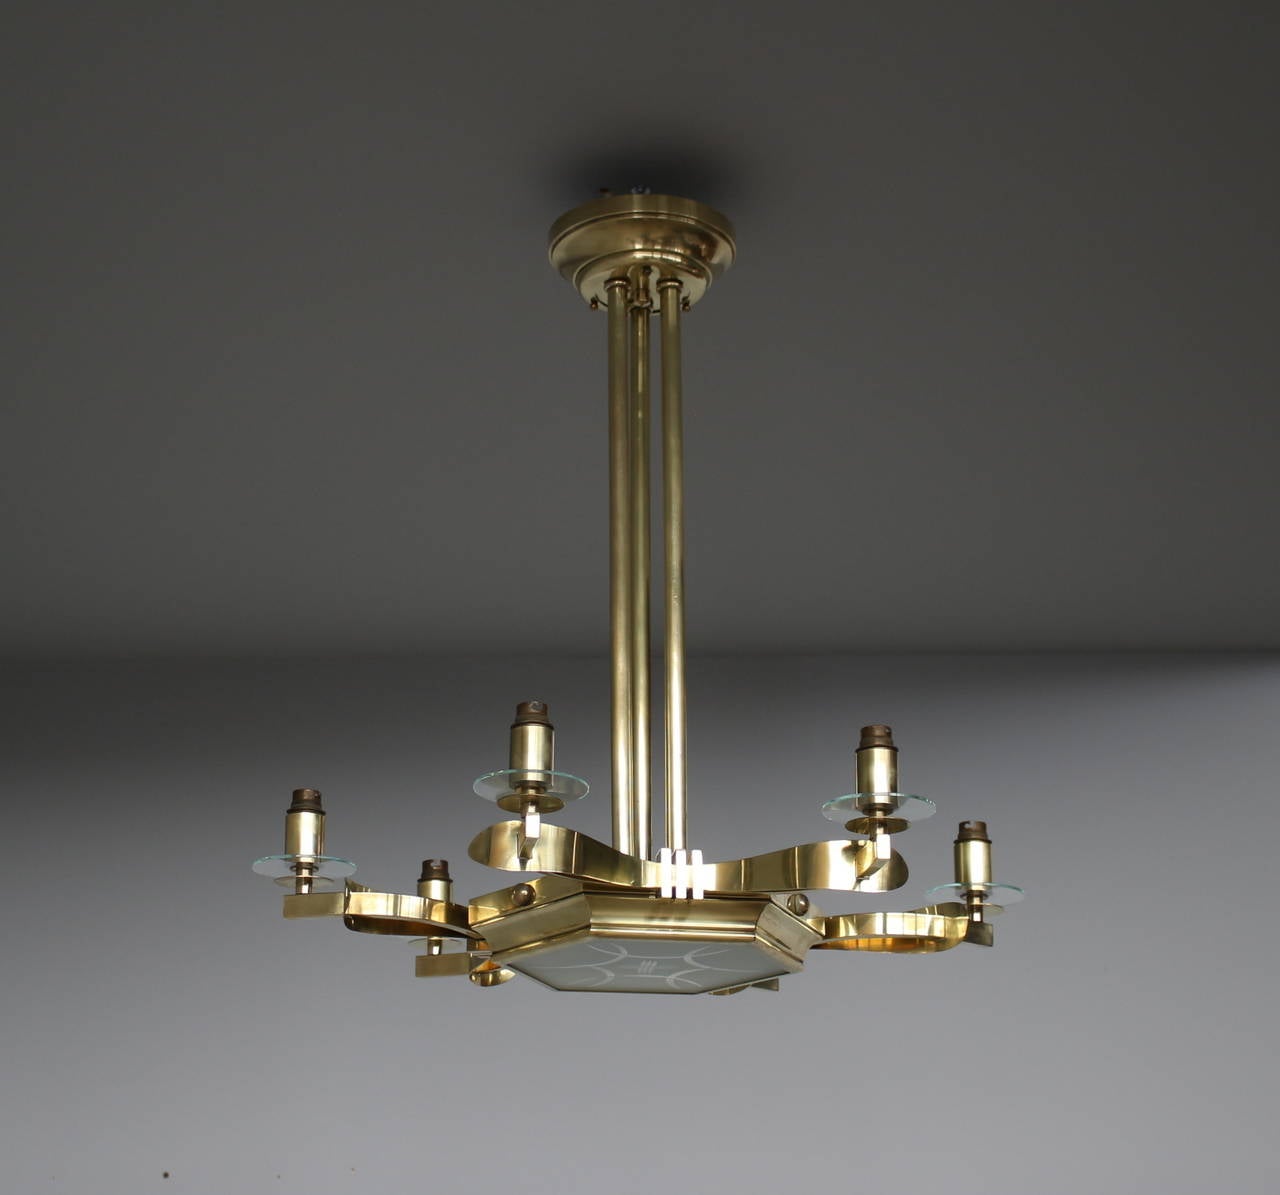 A fine French Mid-Century six arms chandelier in brass with a central engraved frosted glass diffuser and clear glass details.